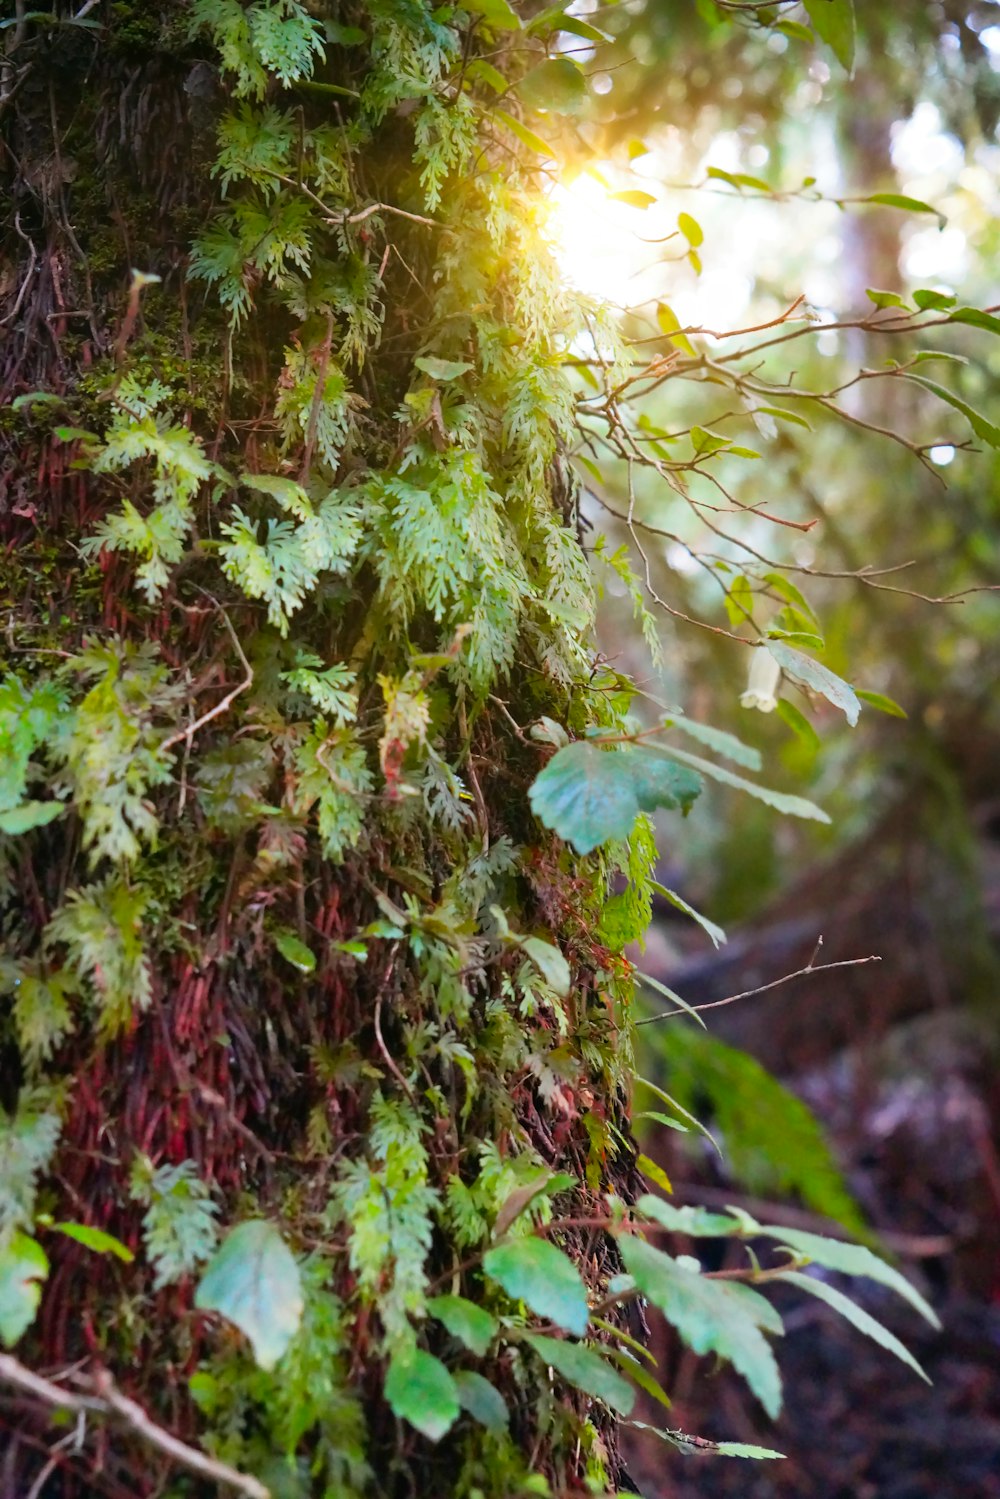 a mossy tree in a forest with sunlight coming through the leaves